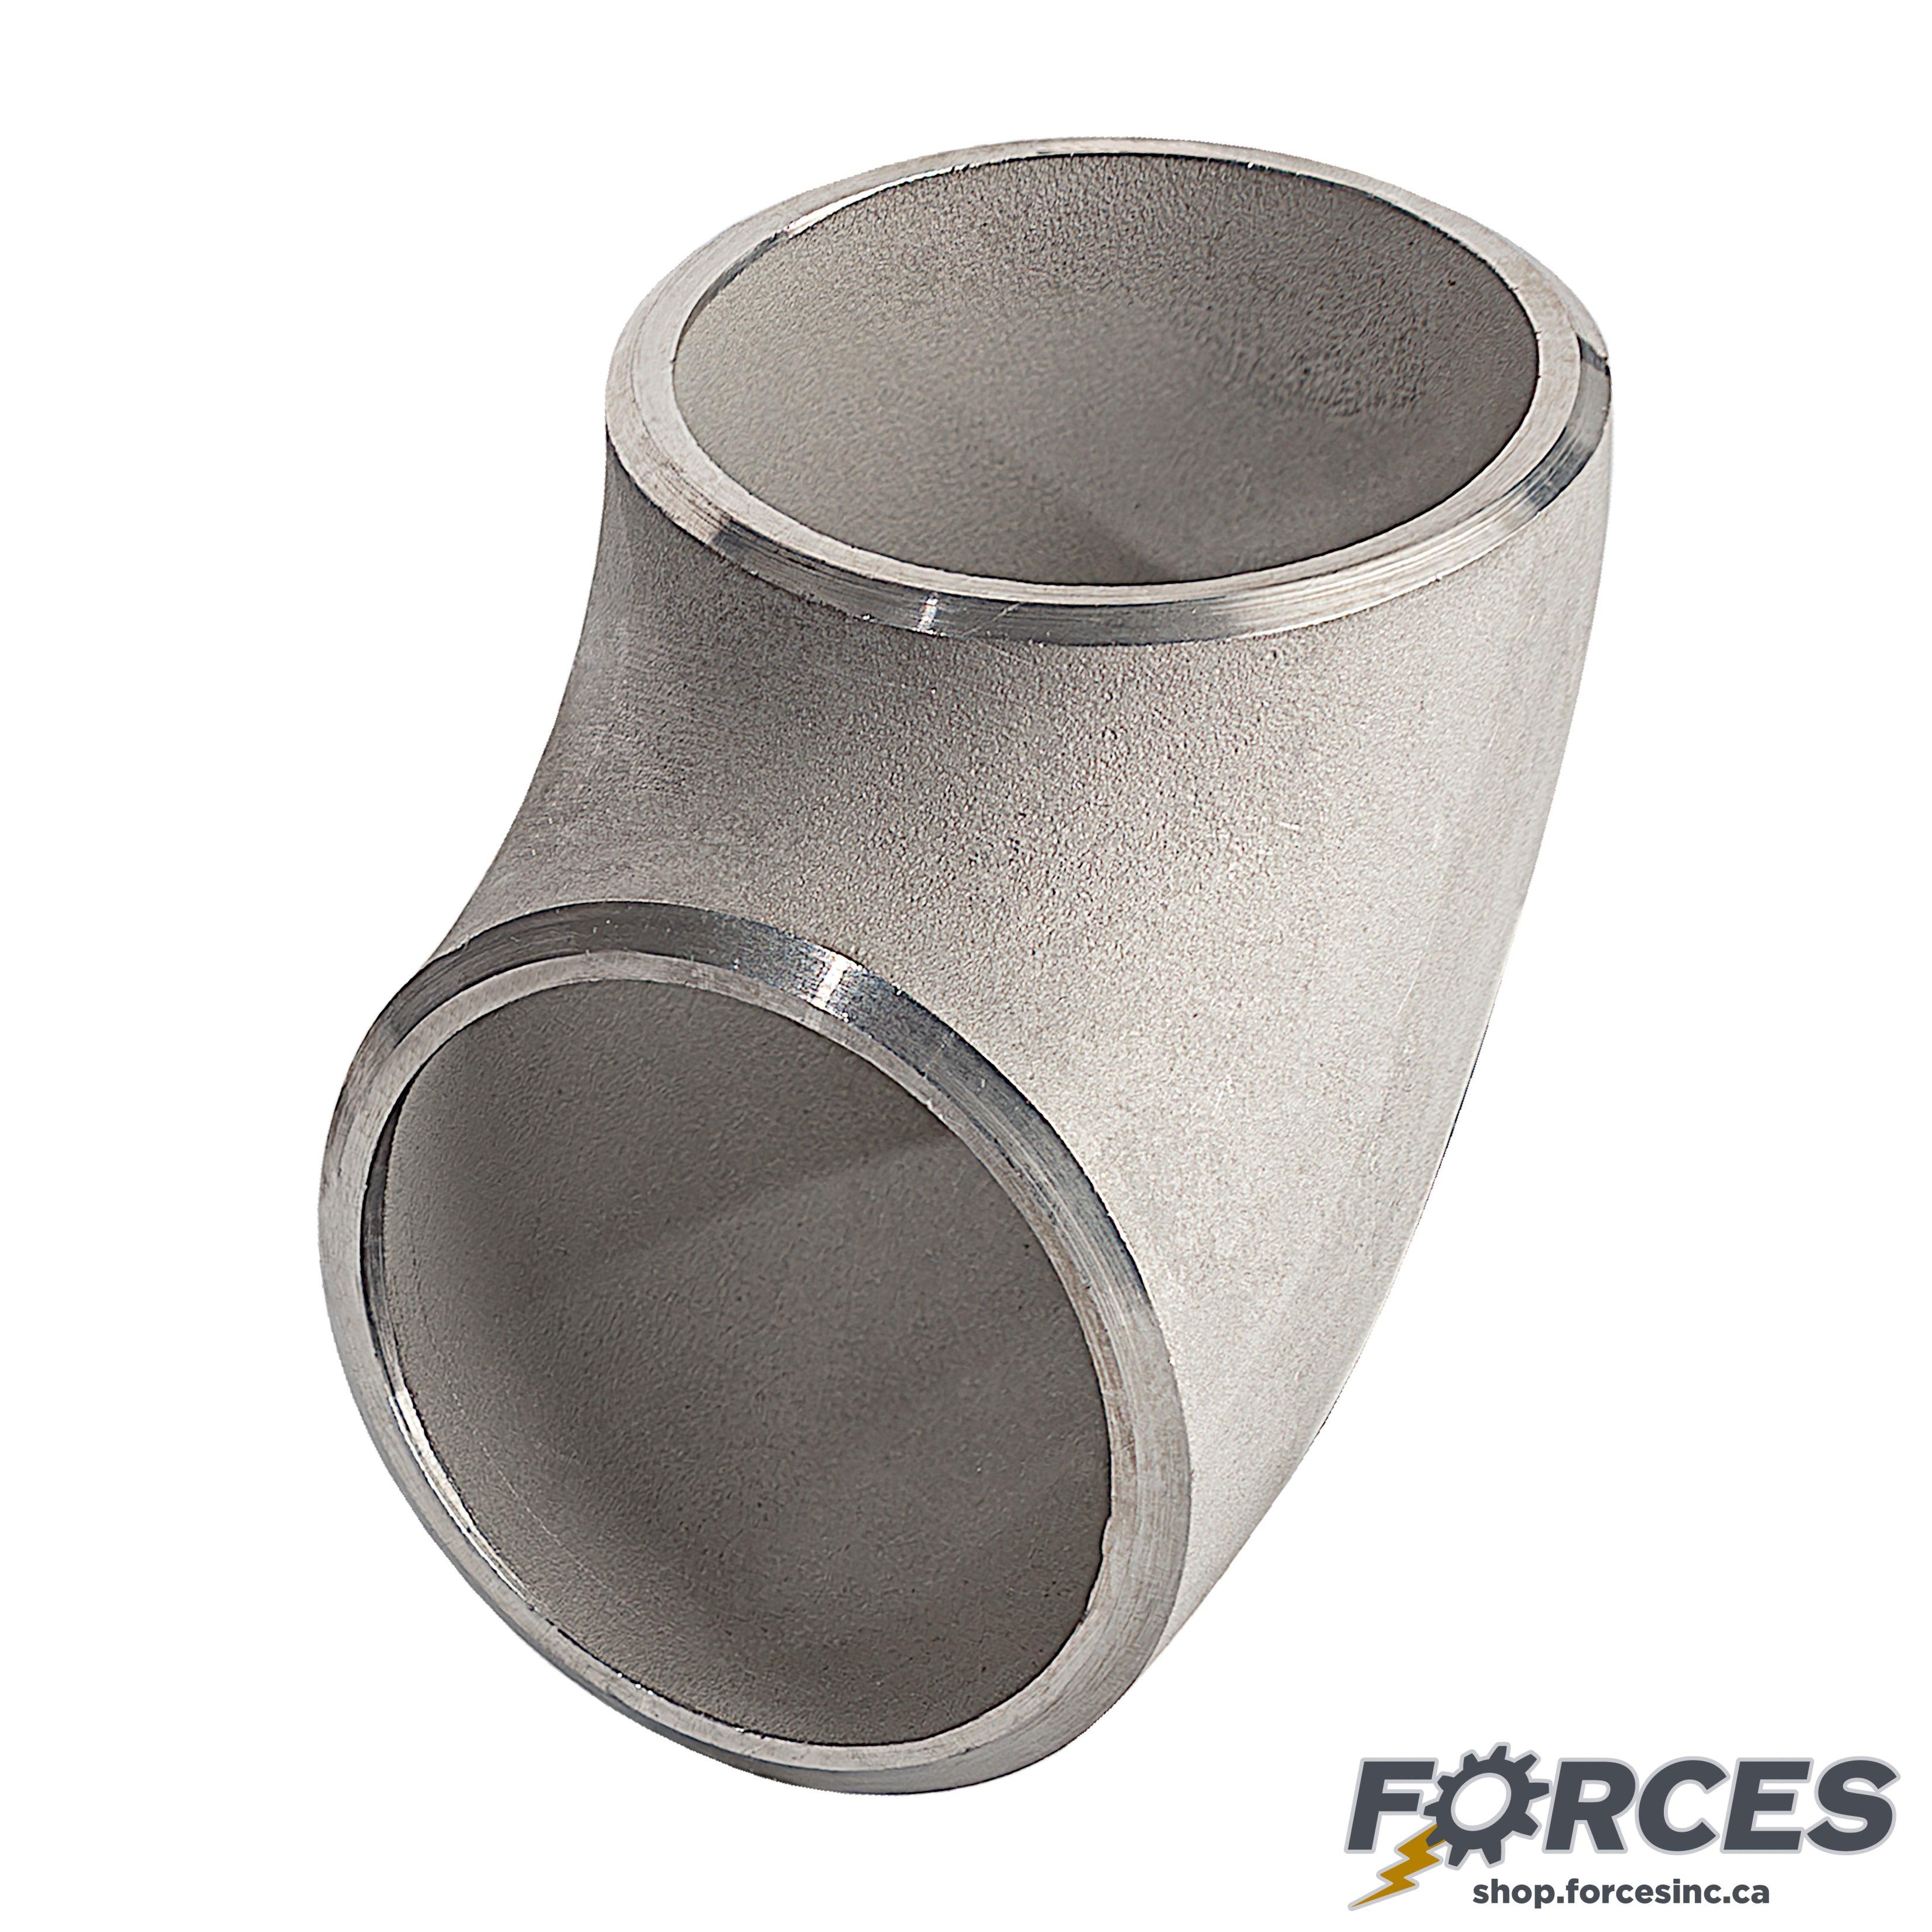 1-1/2" Elbow 45° SCH 10 Butt Weld - Stainless Steel 304 - Forces Inc